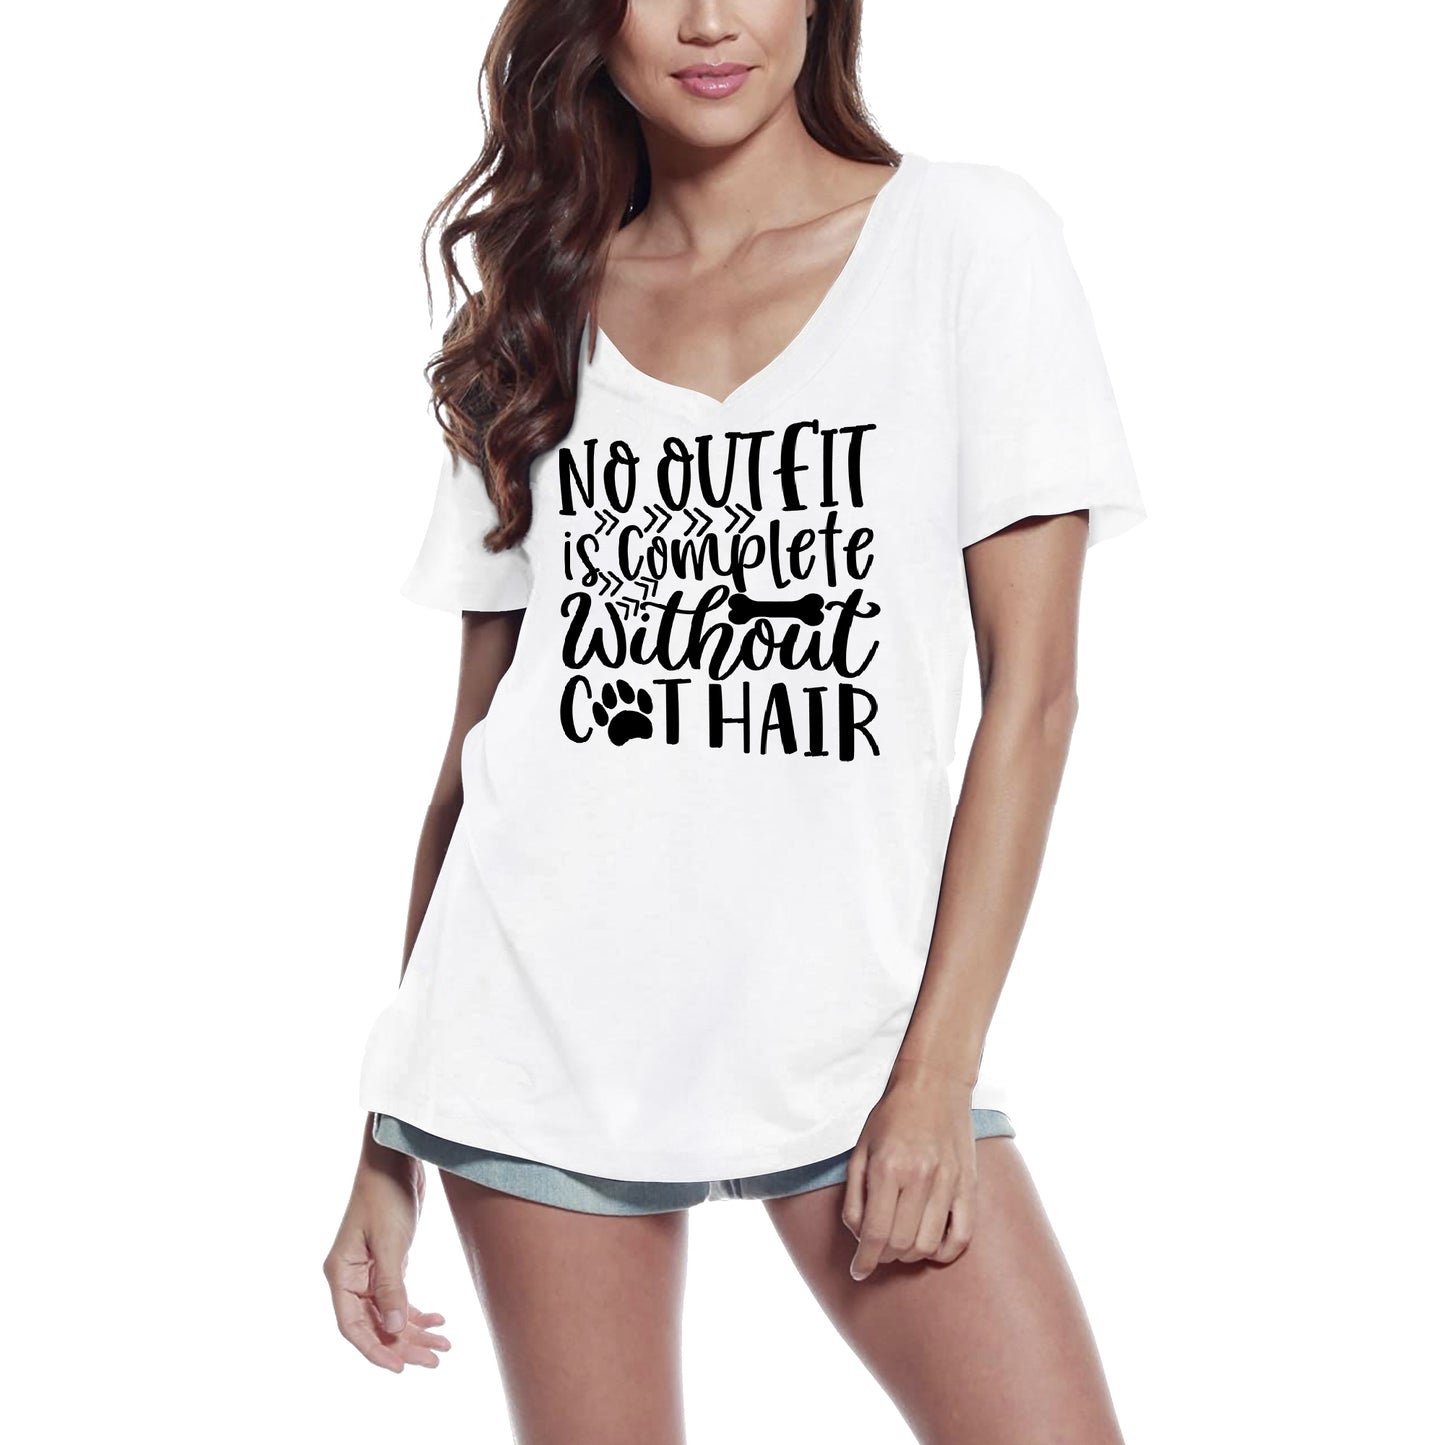 ULTRABASIC Women's T-Shirt No Outfit Is Complete Without Cat Hair - Short Sleeve Tee Shirt Tops